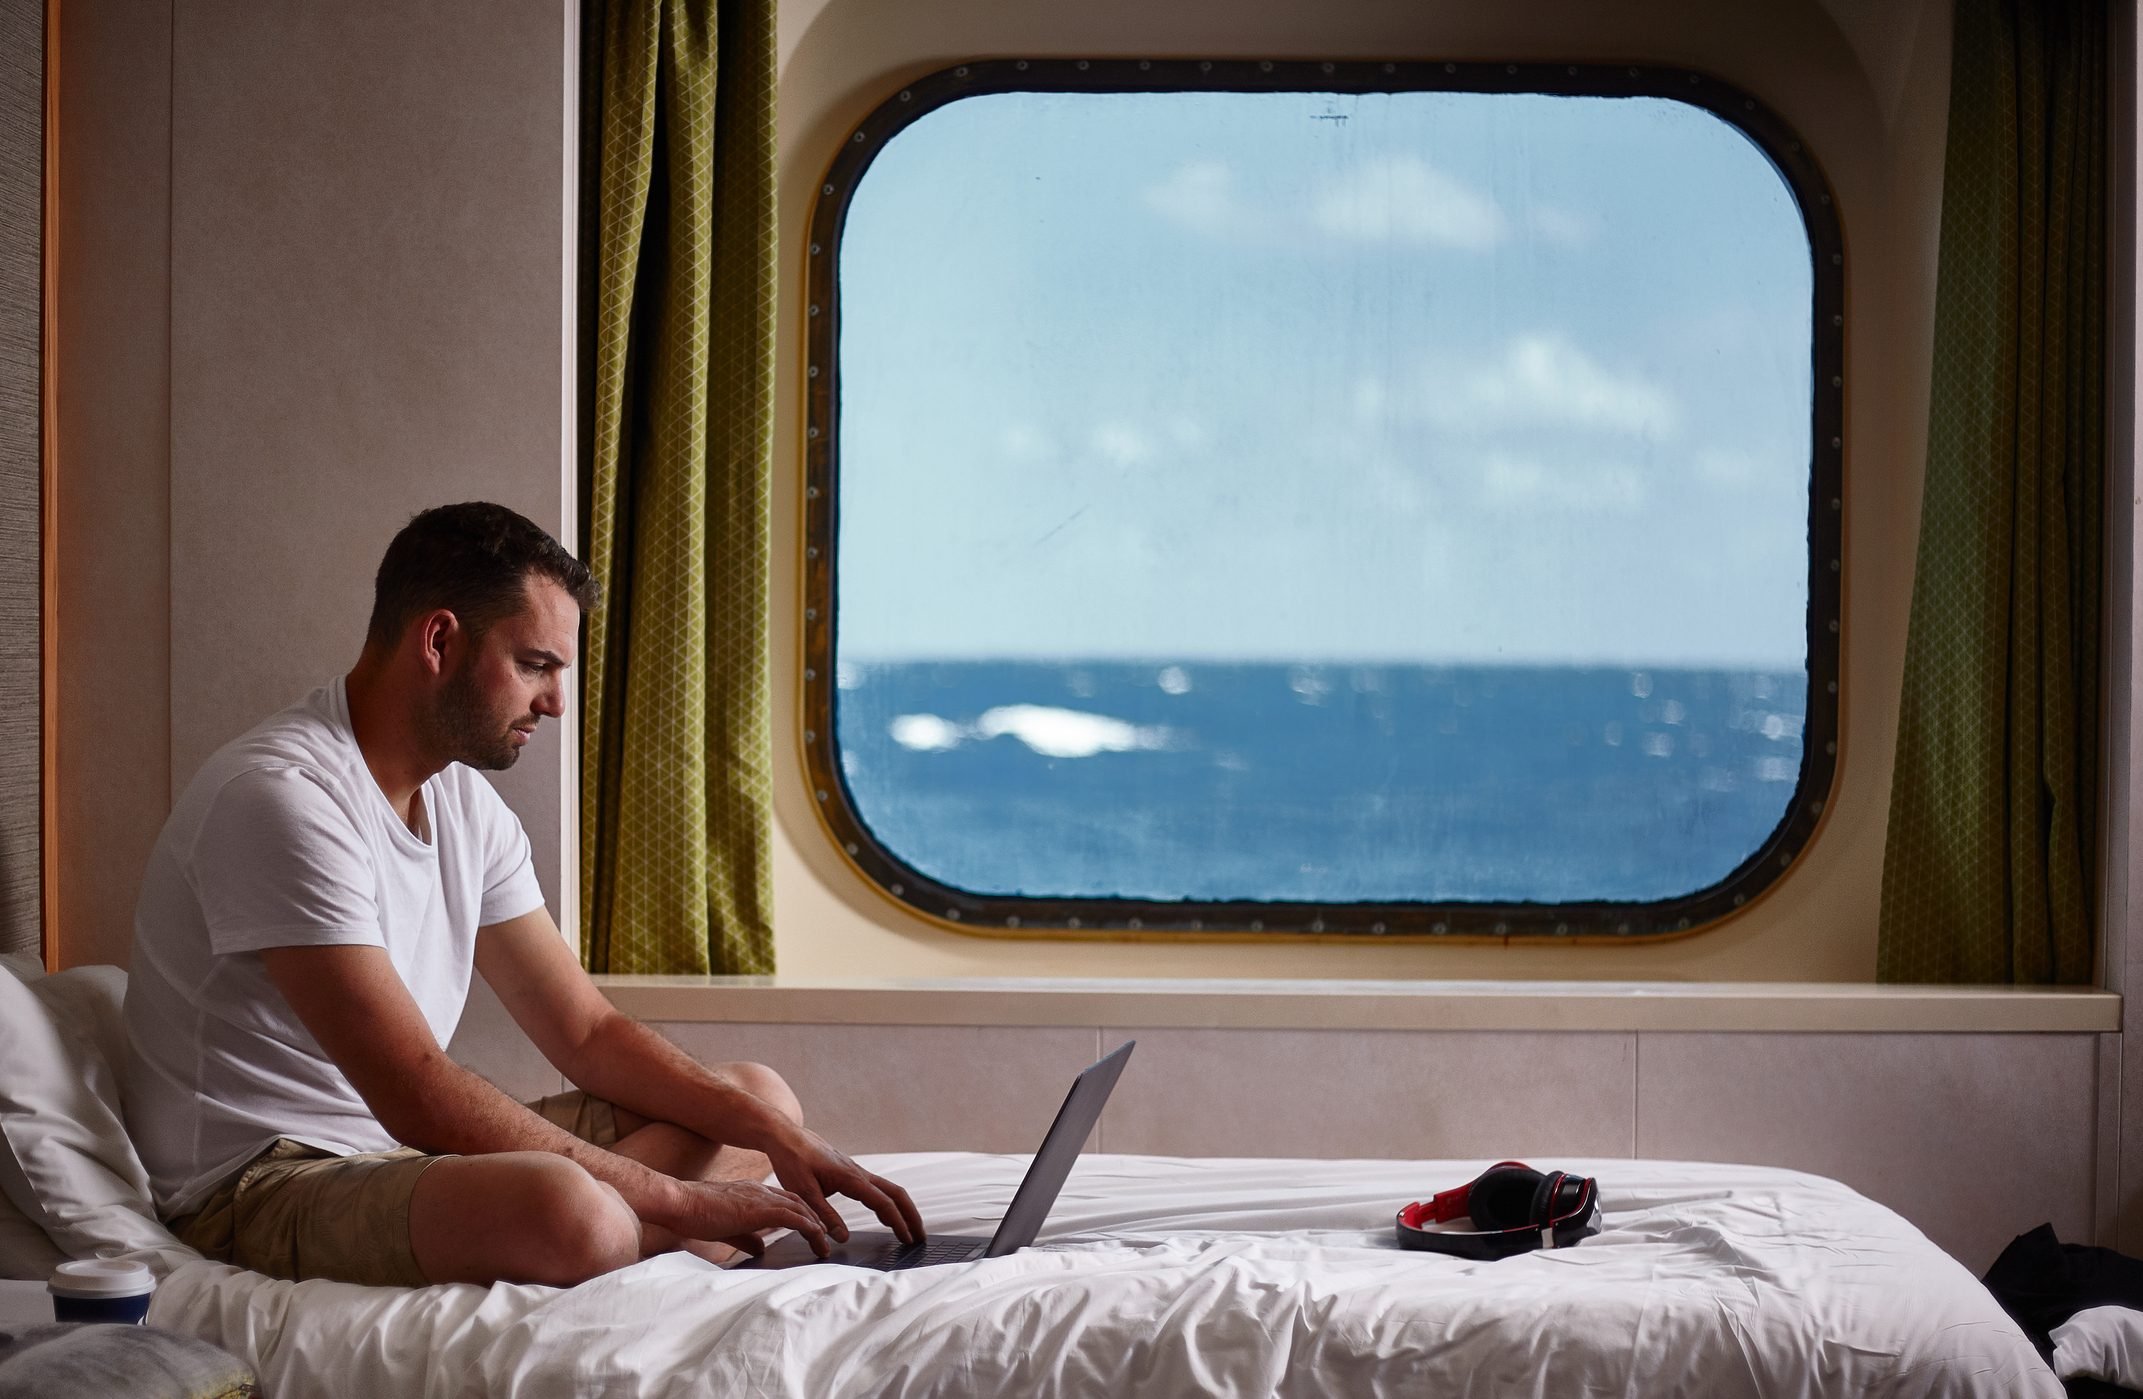 <p>This may sound crazy, but it's one of the smartest cruise tips. Booking your next cruise while on your current cruise is a terrific way to make the most of free onboard credit and loyalty points. Once you leave the ship, the deals they're offering will be gone.</p> <p><strong>What to do instead:</strong> Ask your host about what deals they are offering before you disembark. This is the best time to get a great deal on your <a href="https://www.rd.com/article/favorite-cruises/">favorite cruises</a>—and ones that won't be available at a later date. Cruise lines really want you to book your next cruise while you're still there and excited, so they may offer you a cheaper upgrade to a higher tier of the loyalty program and/or nicer perks on your next cruise. If you can book at this time, you definitely should.</p>